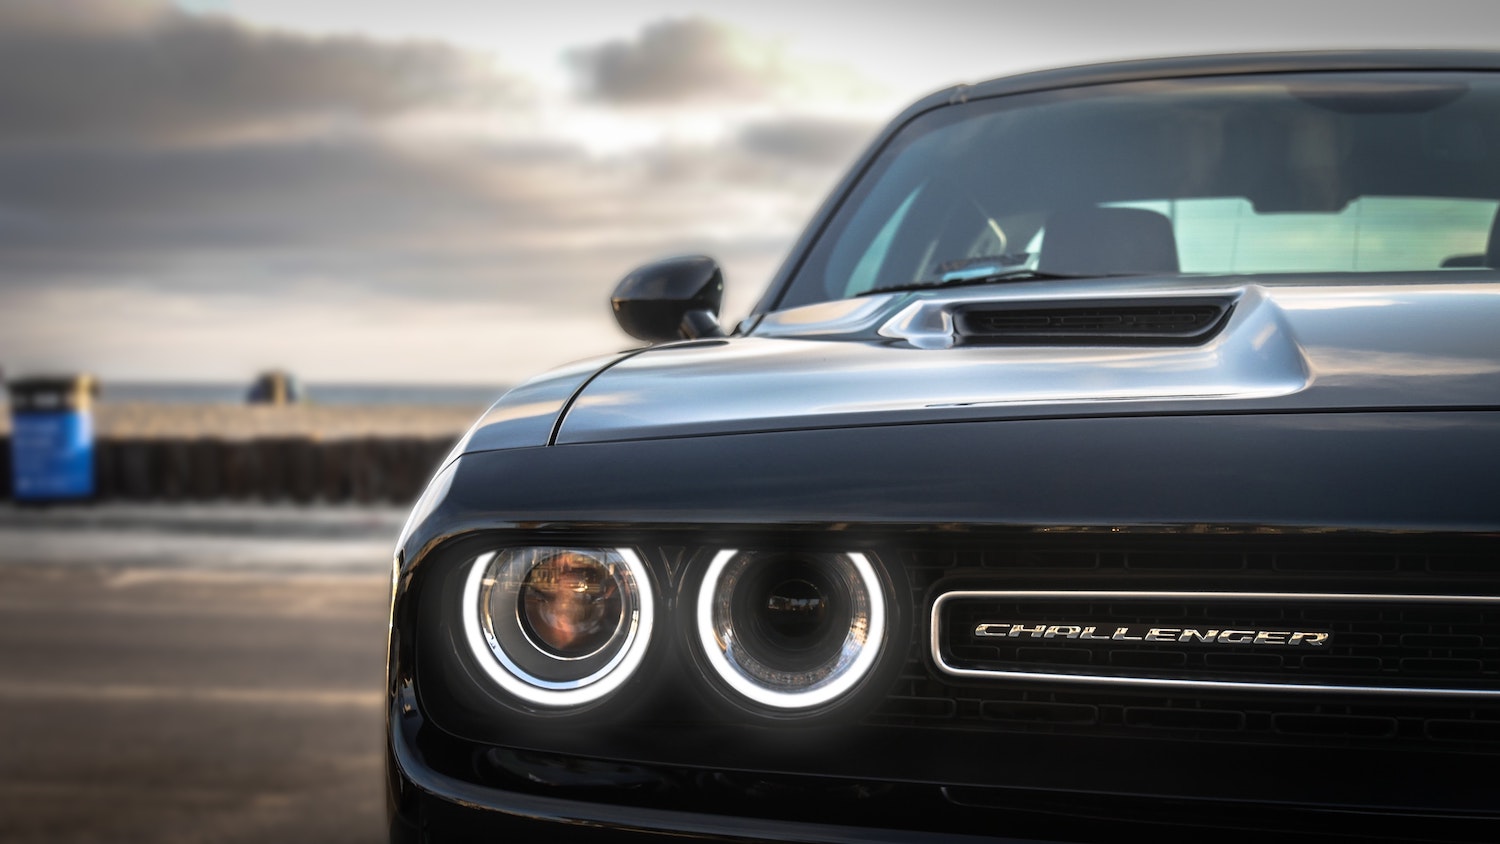 We will see a new, possibly hybrid version of the Dodge Challenger for 2024  | Noah Bogaard via Unsplash